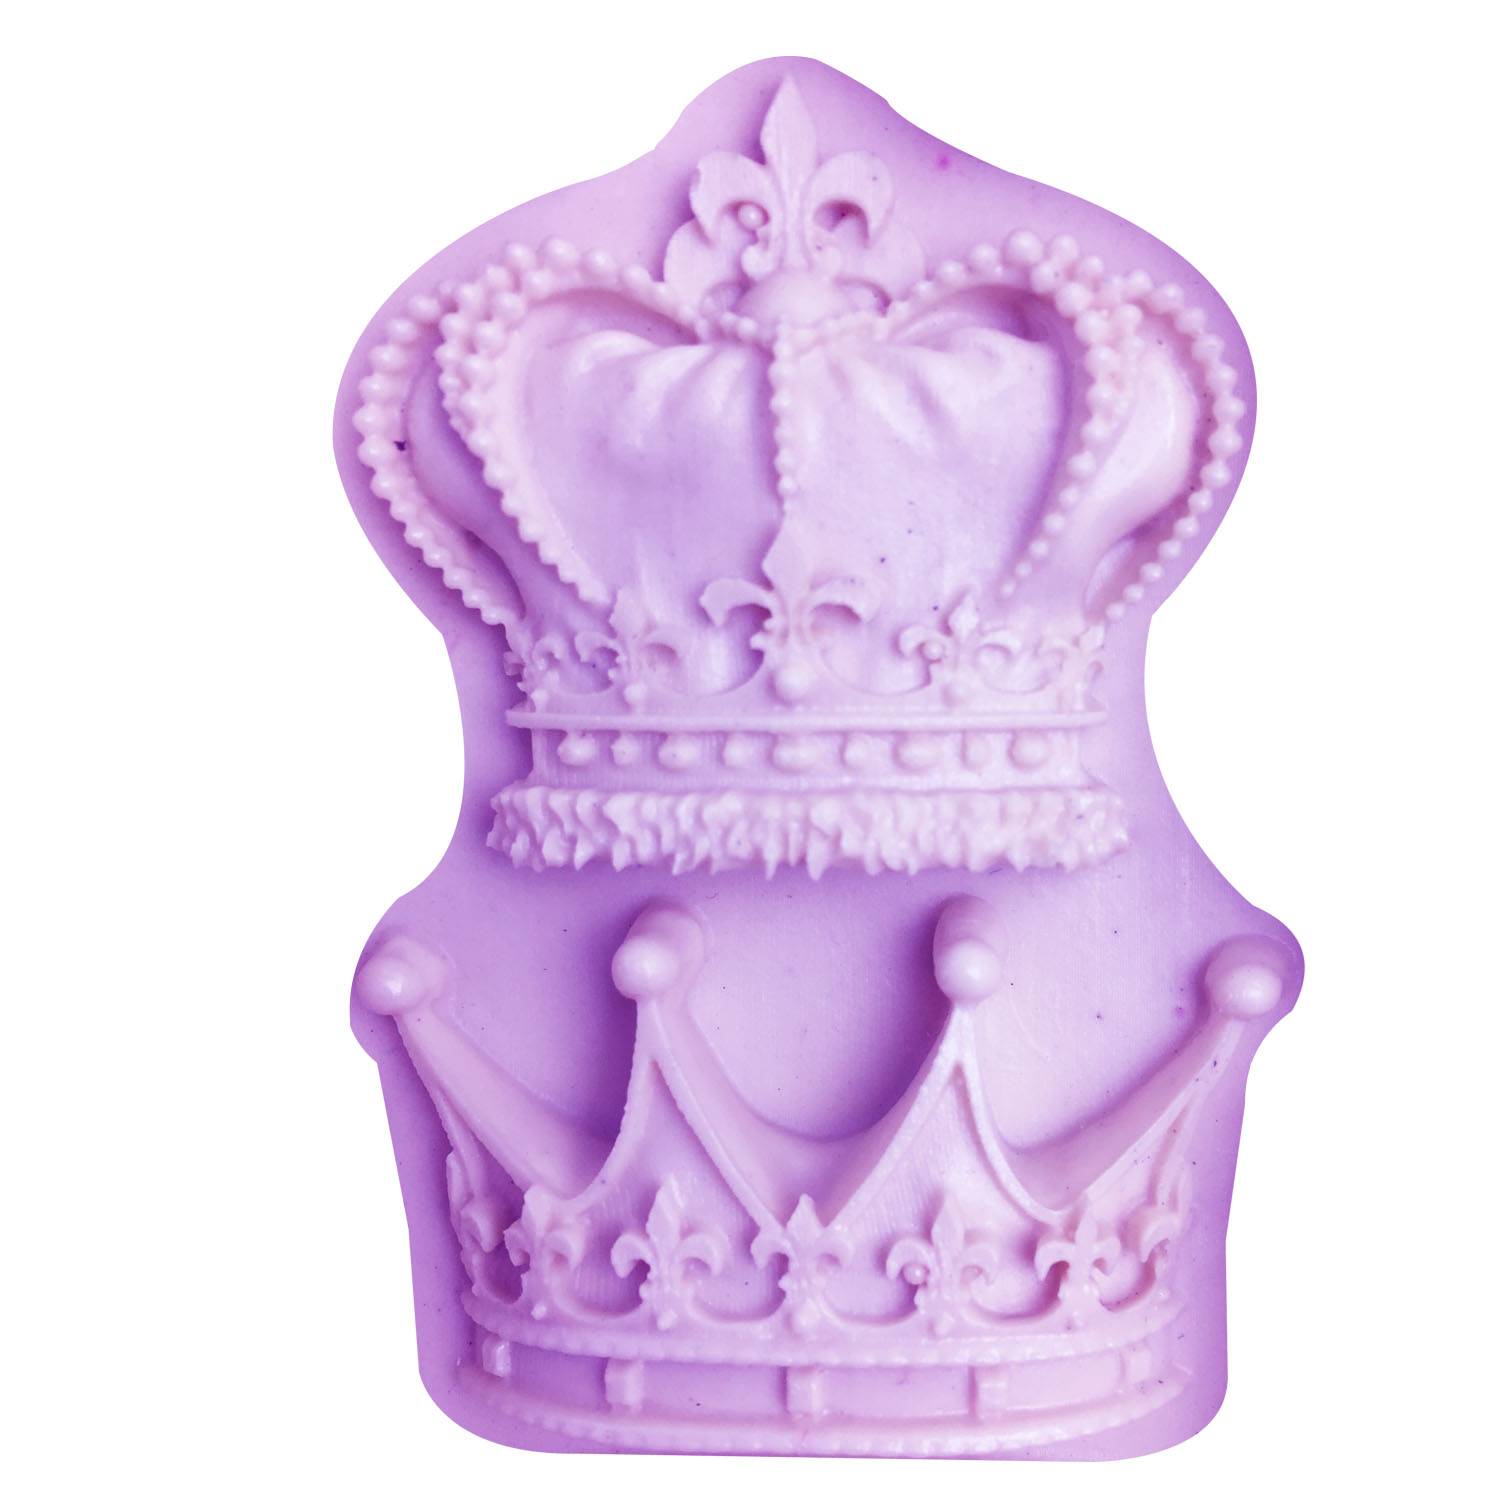 Crown Shaped Silicone Fandont Mold Bakeware Kitchen Accessories